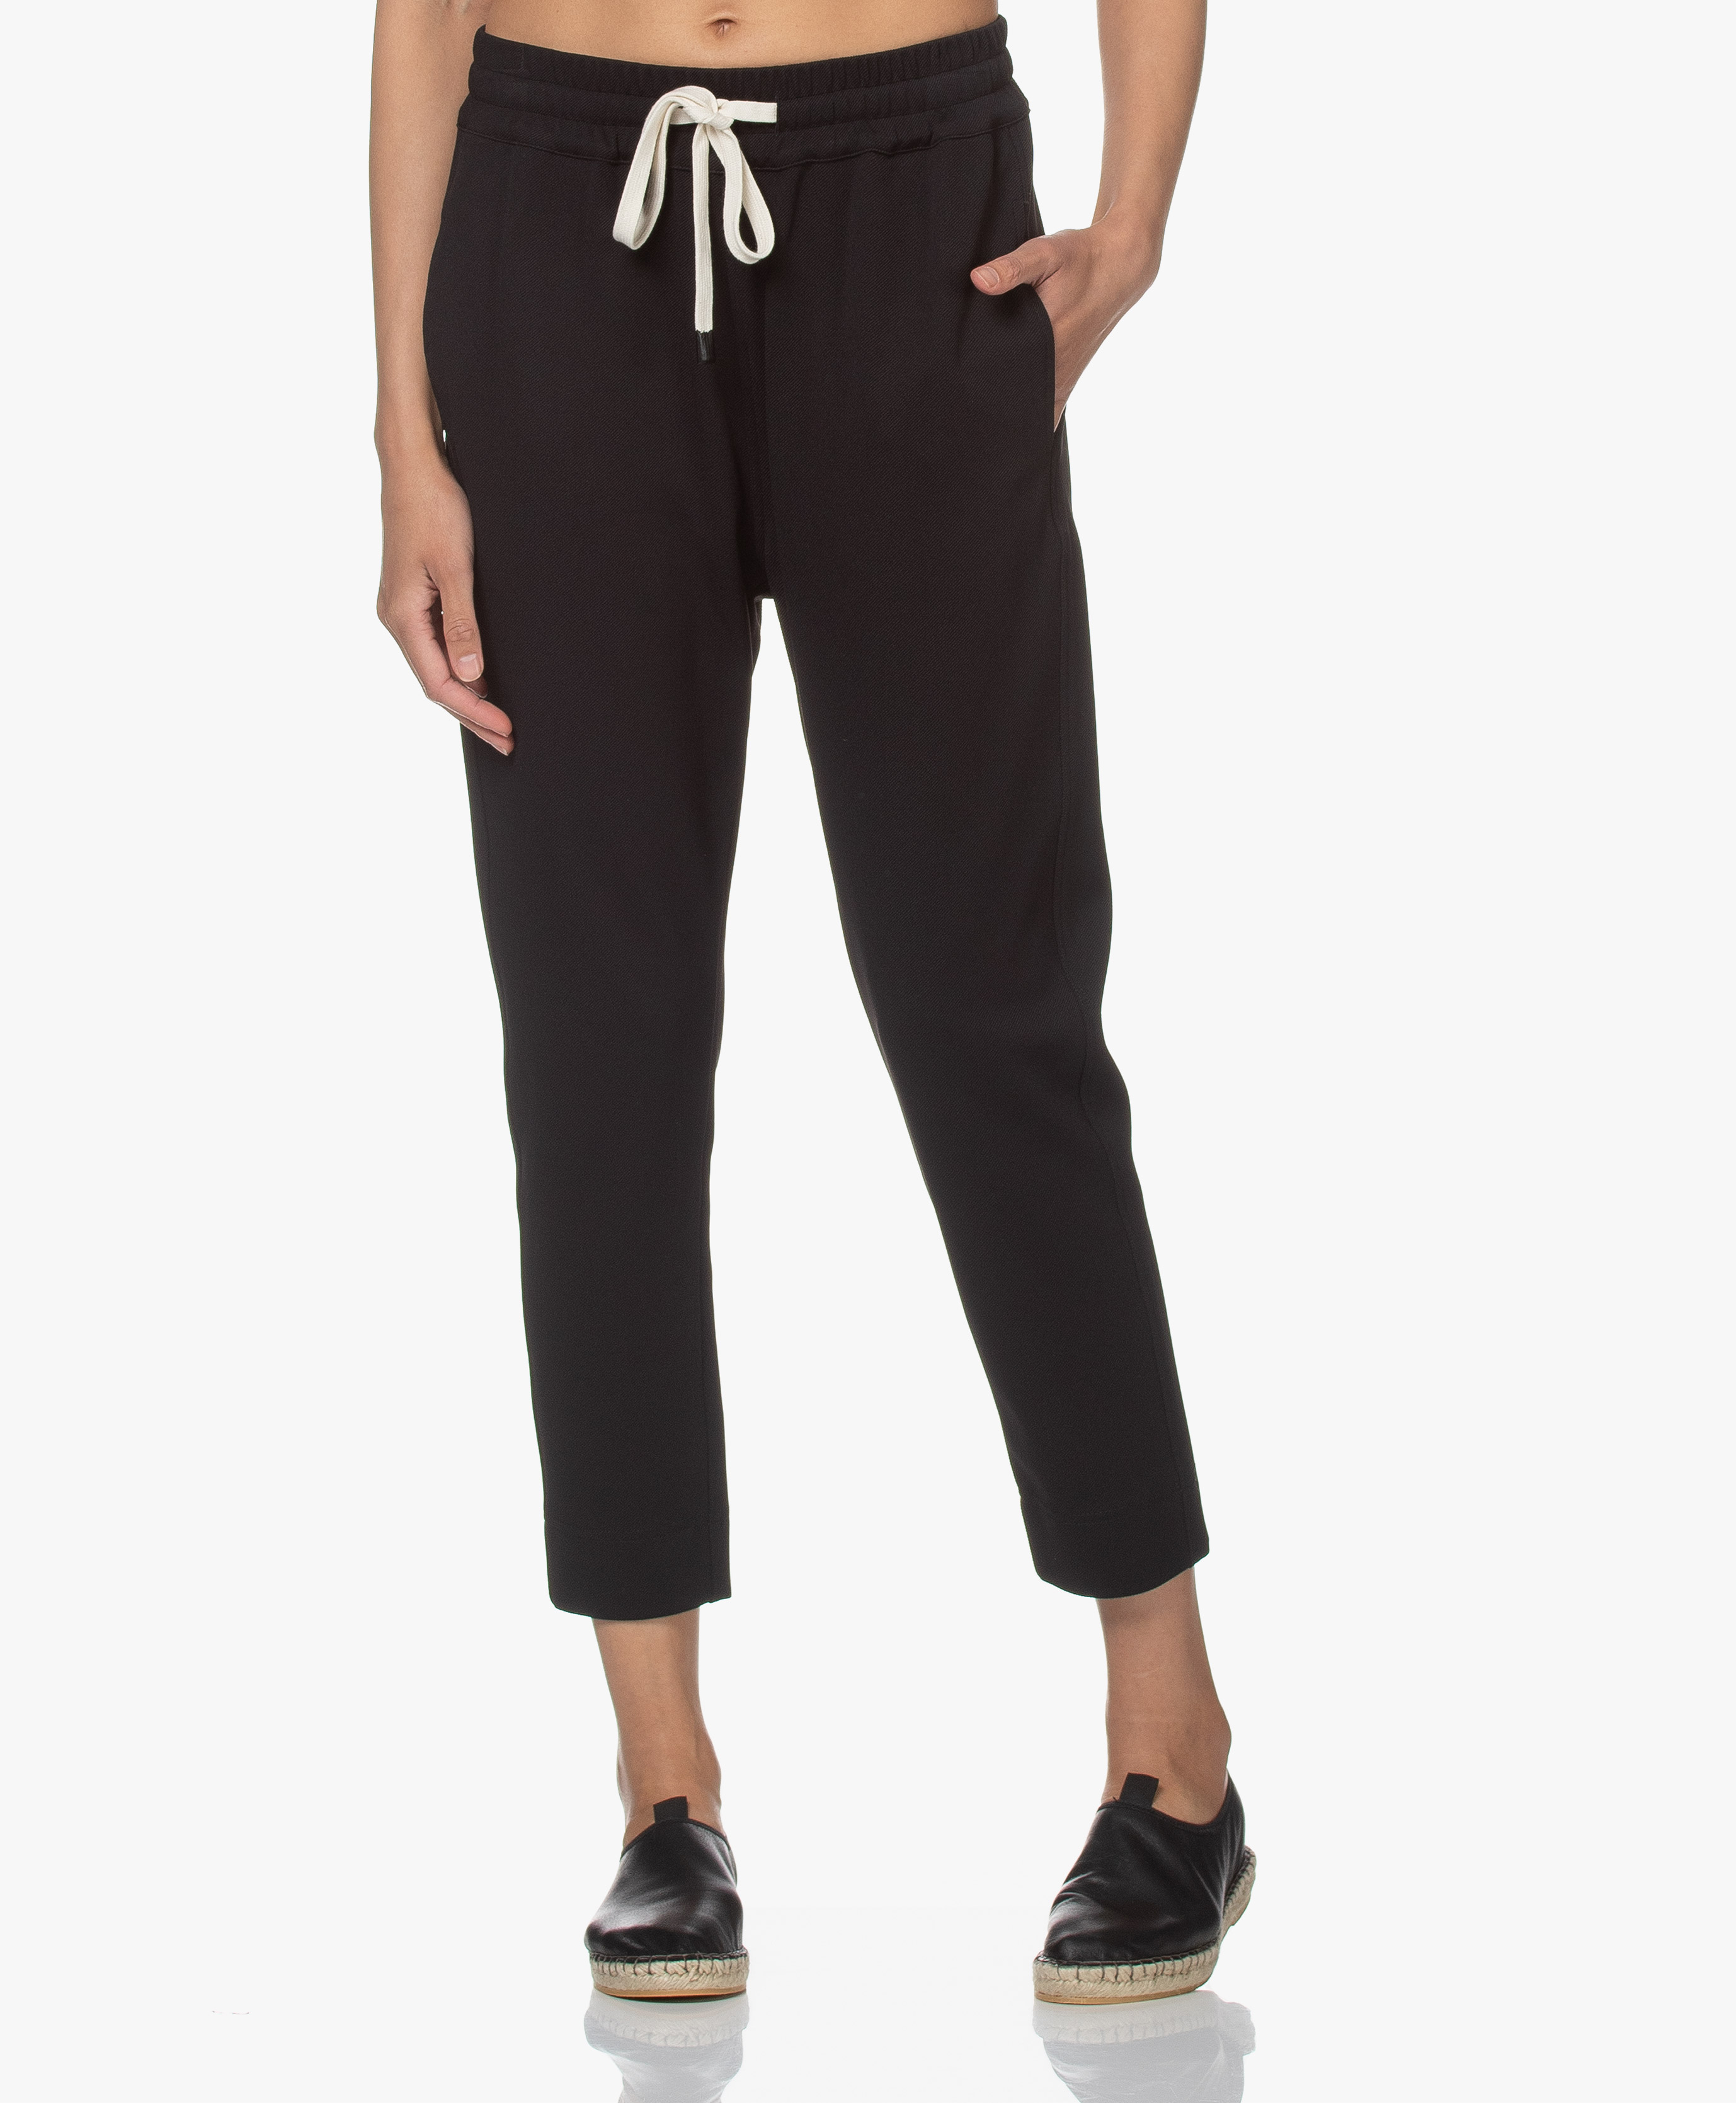 Share more than 70 twill stretch pants - in.eteachers